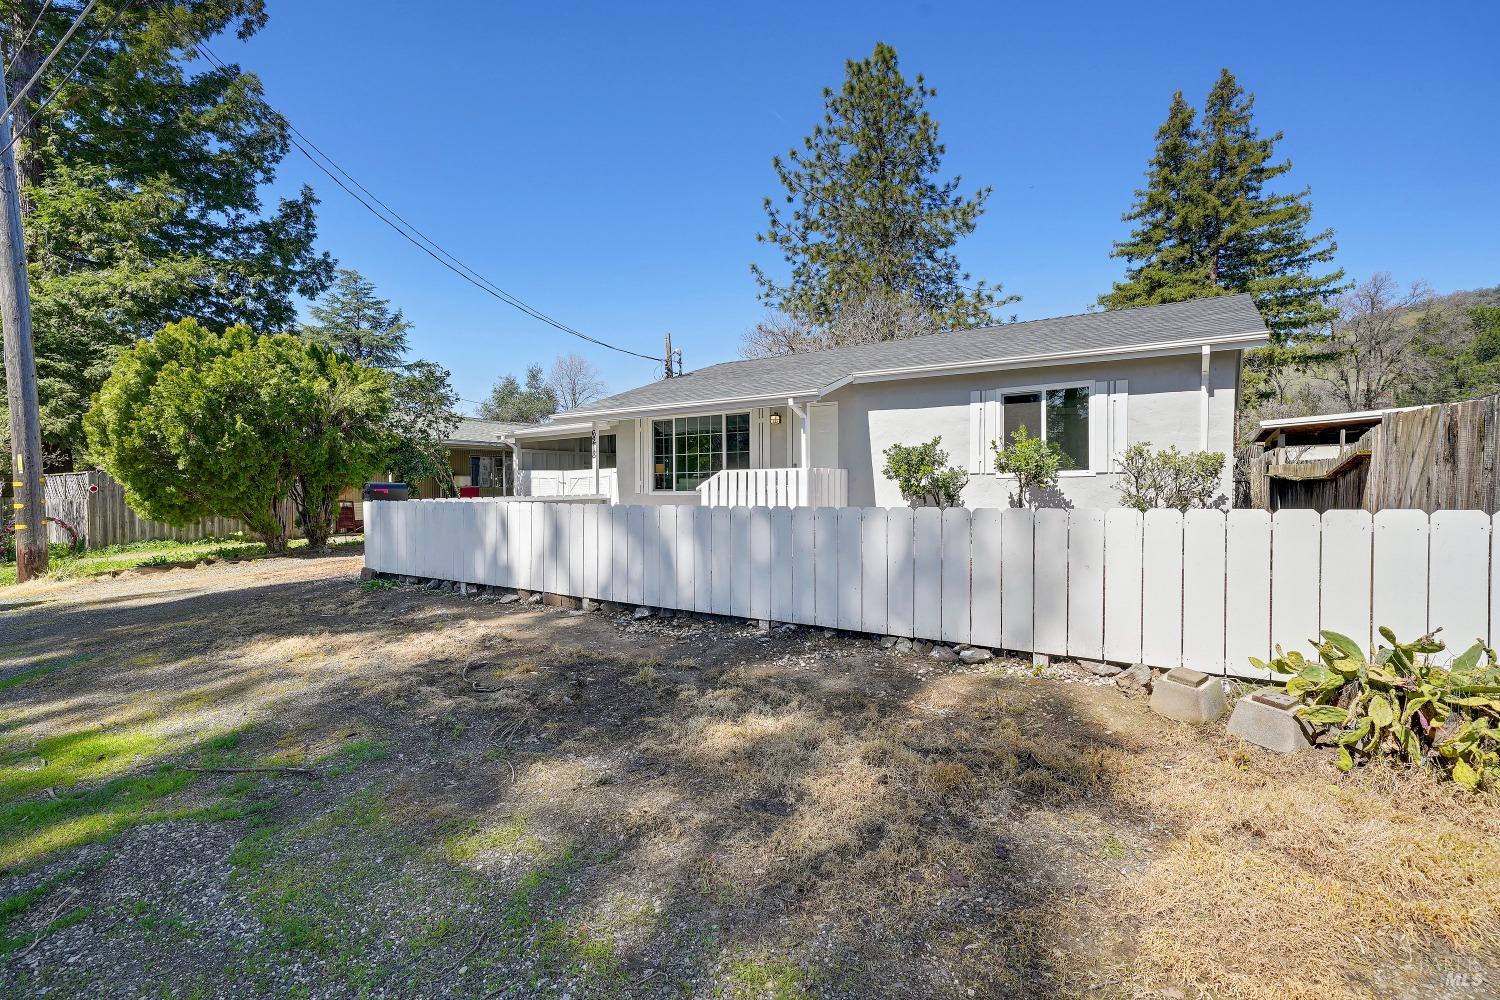 Photo of 6218 2nd Ave in Lucerne, CA